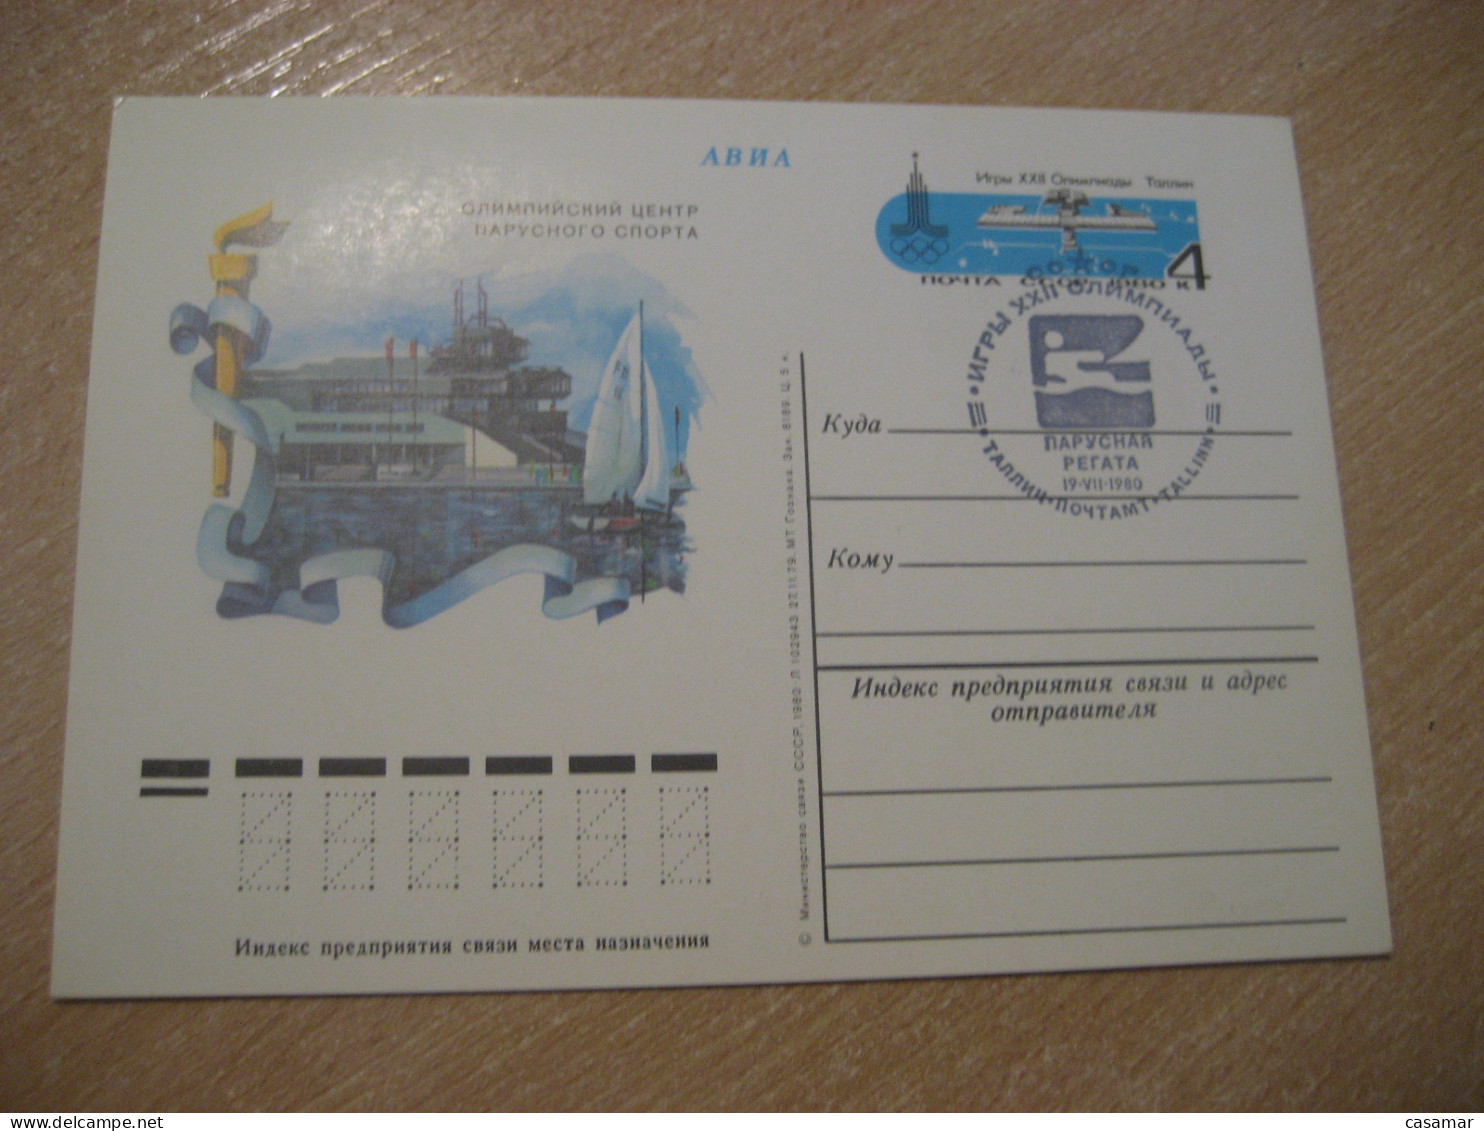 TALLINN 1980 Sail Sailing Moscow Olympic Games Olympics Torch Cancel Postal Stationery Card RUSSIA USSR - Zomer 1980: Moskou